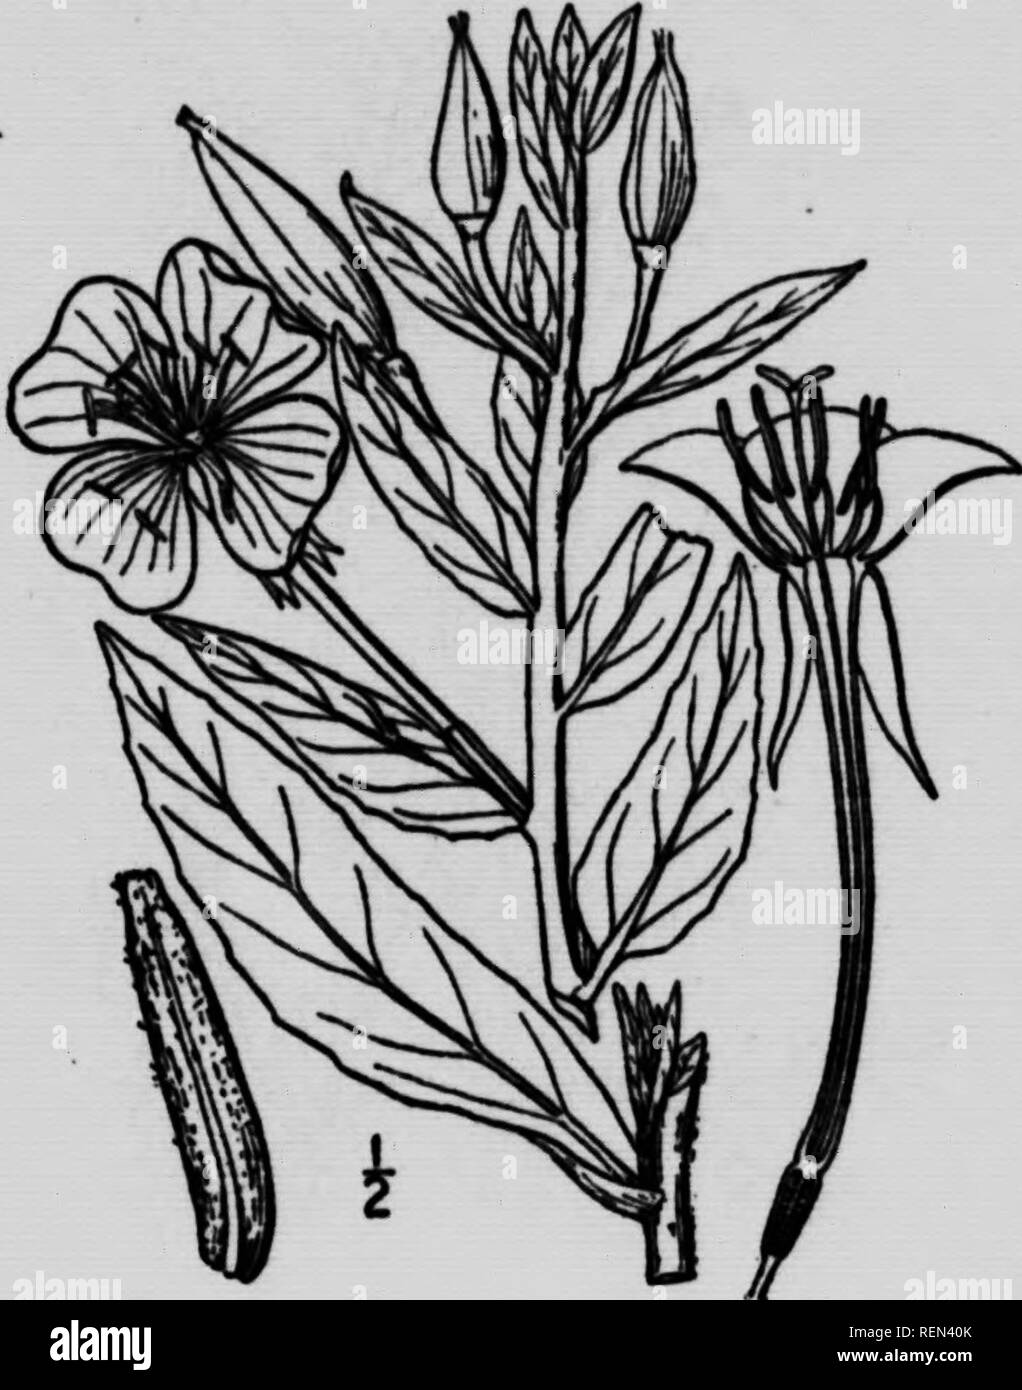 . Weeds of the farm and ranch [microform]. Sols; Weeds; Tillage; Mauvaises herbes. It SS DEPARTSfENT OF AoBICULTUBS COMMON EVENING PRIMROSE—Ocno/Aera hiennia. L. A tail, stoat native plant of biennial habit. Its leaves are from one to six inches long, pointed, narrowed at the base and closely attached to the stem, or short stalked. Its flowers, which open at night, are yellow and the seed pods grow close to the stem, about an inch in length, containing small irregularly shaped brown seeds. This weed is seldom troublesome except where crops have been sown on stubble and is easily destroyed by f Stock Photo